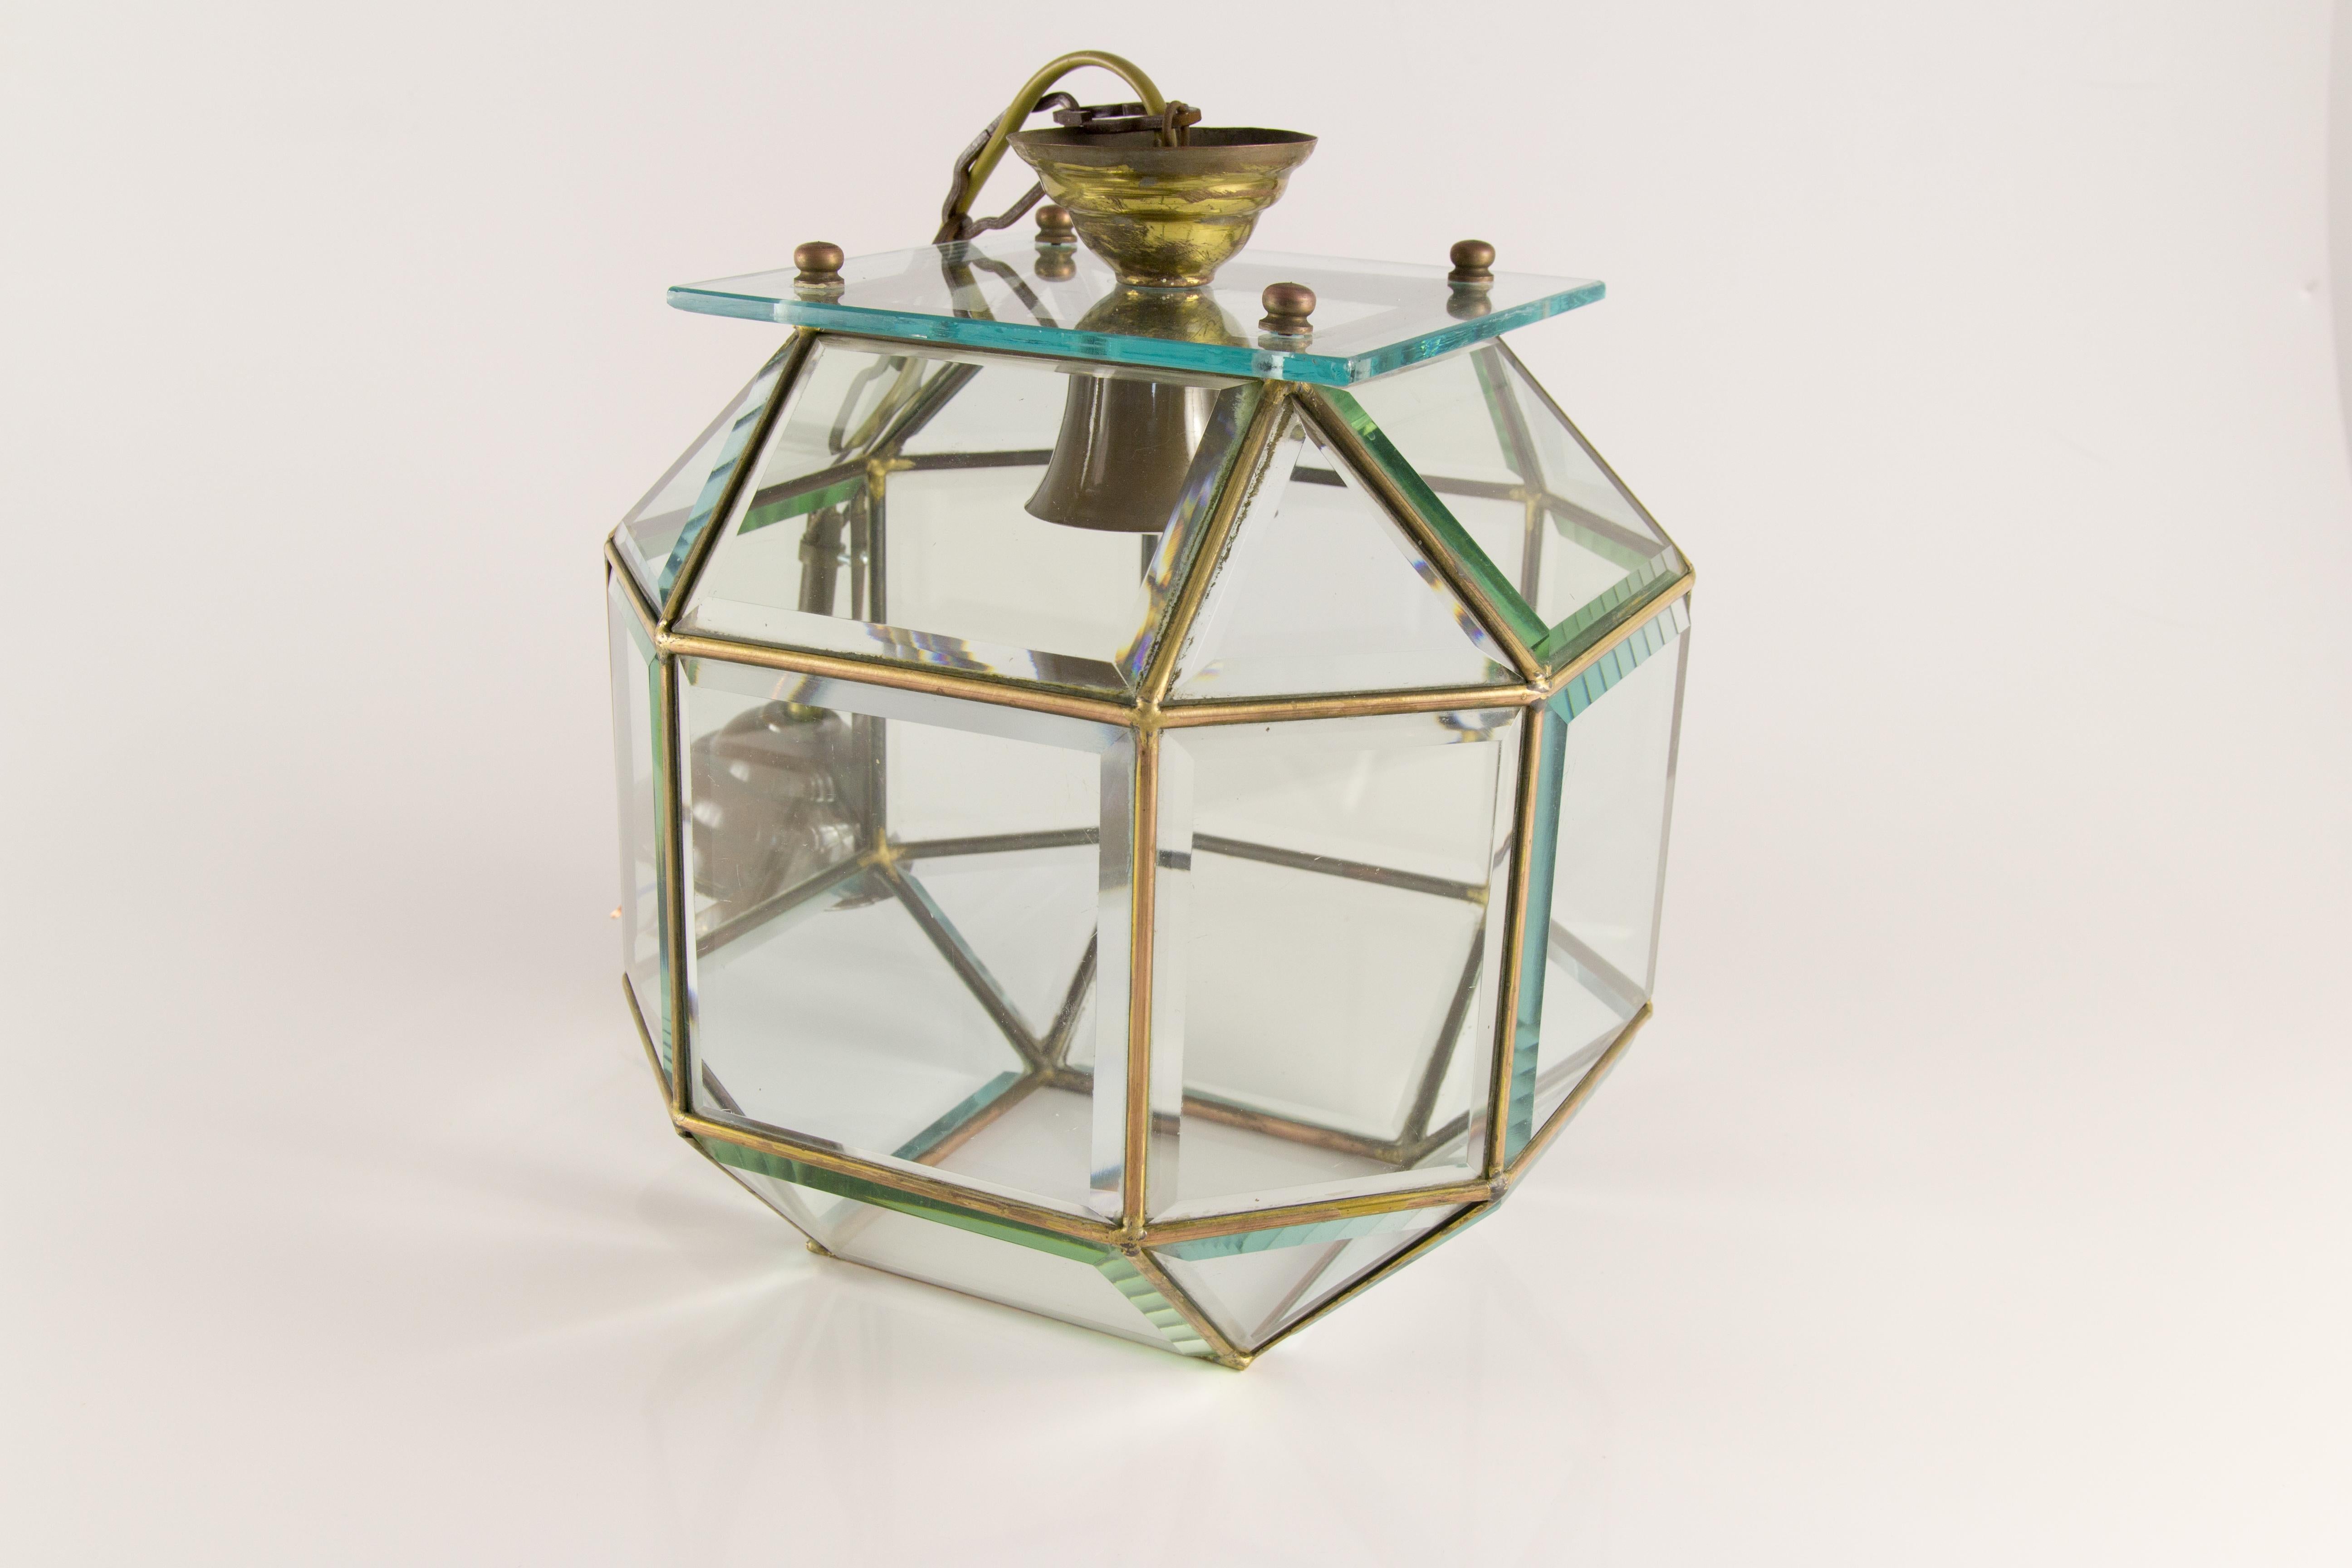 Italian Mid-Century Geometric Beveled Glass and Brass Pendant, 1950s For Sale 7